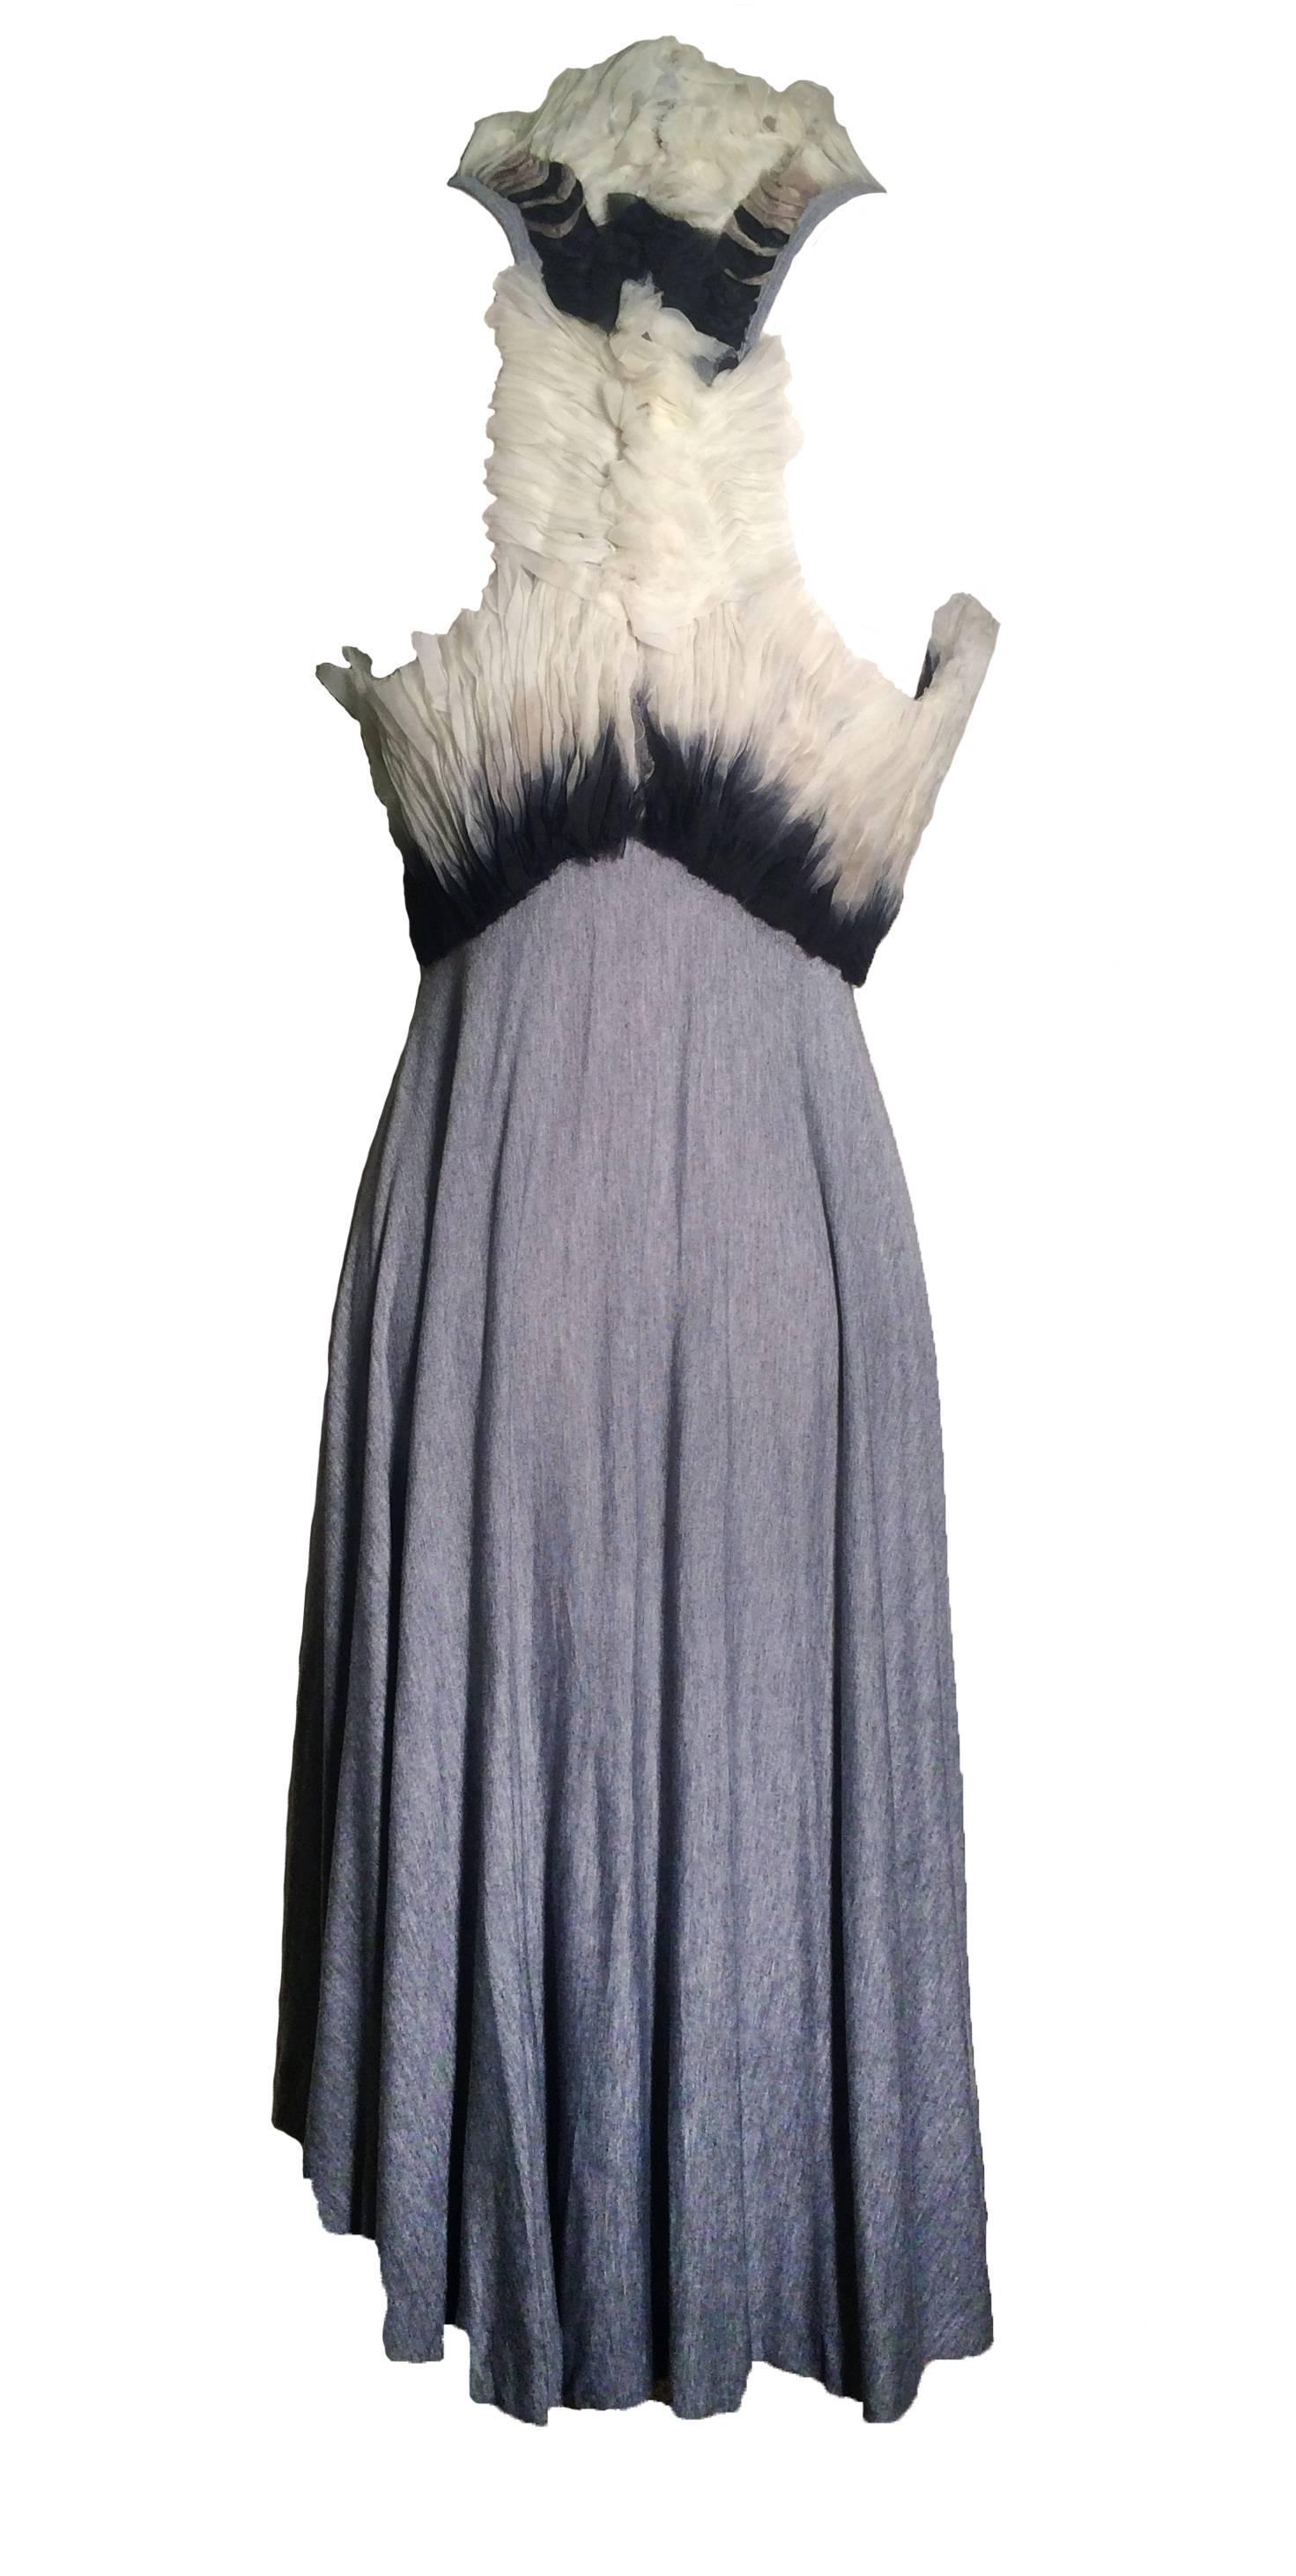 Alexander McQueen 2010/2011 collection super soft grey rayon jersey dress with an empire bodice decorated in pleated, raw edged ombre organdy. Racer back with swingy circle skirt.   Assymetrical hem is longer in center front/back than on sides. Back